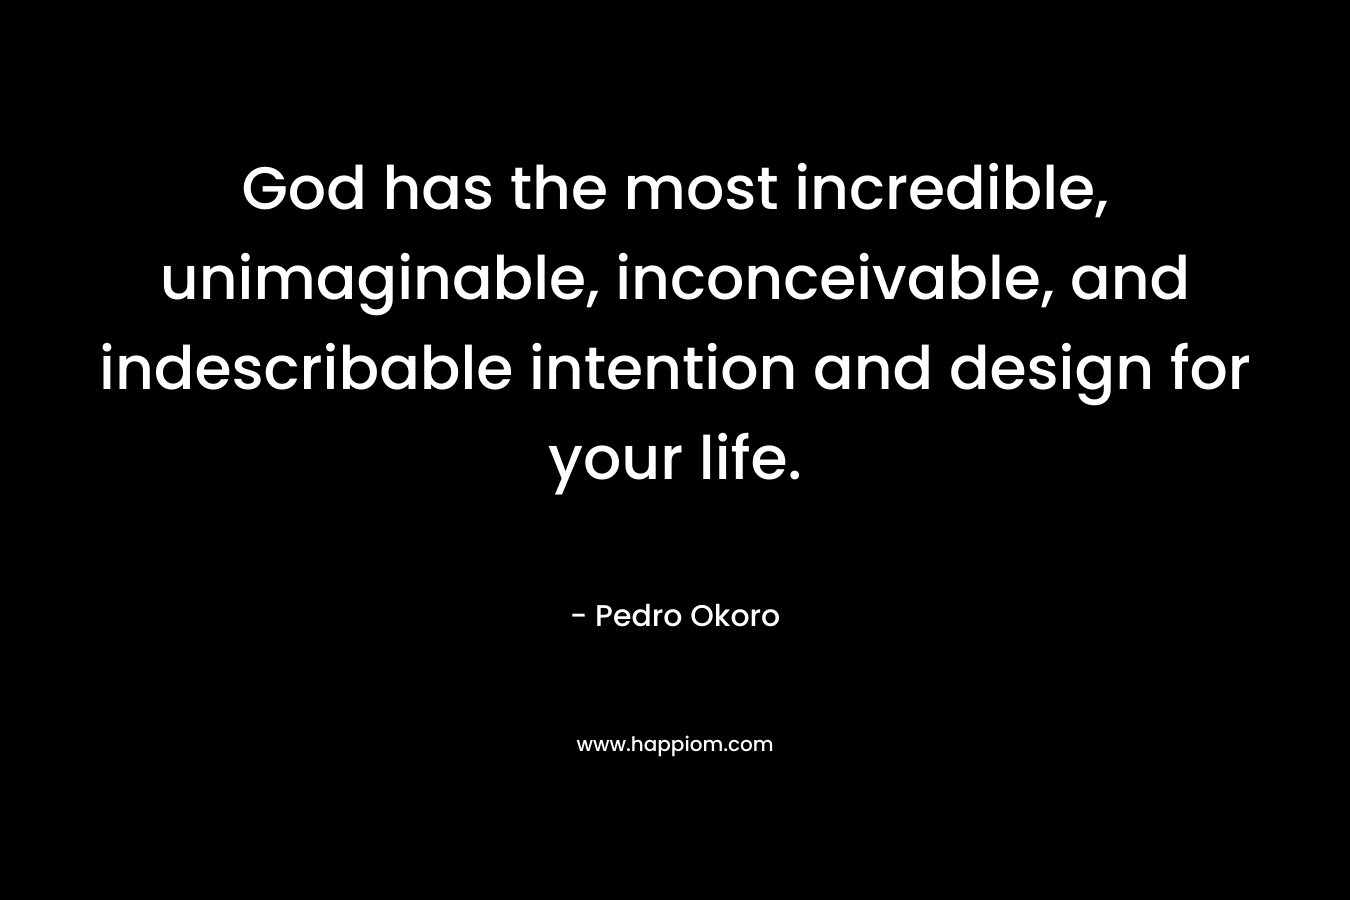 God has the most incredible, unimaginable, inconceivable, and indescribable intention and design for your life. – Pedro Okoro